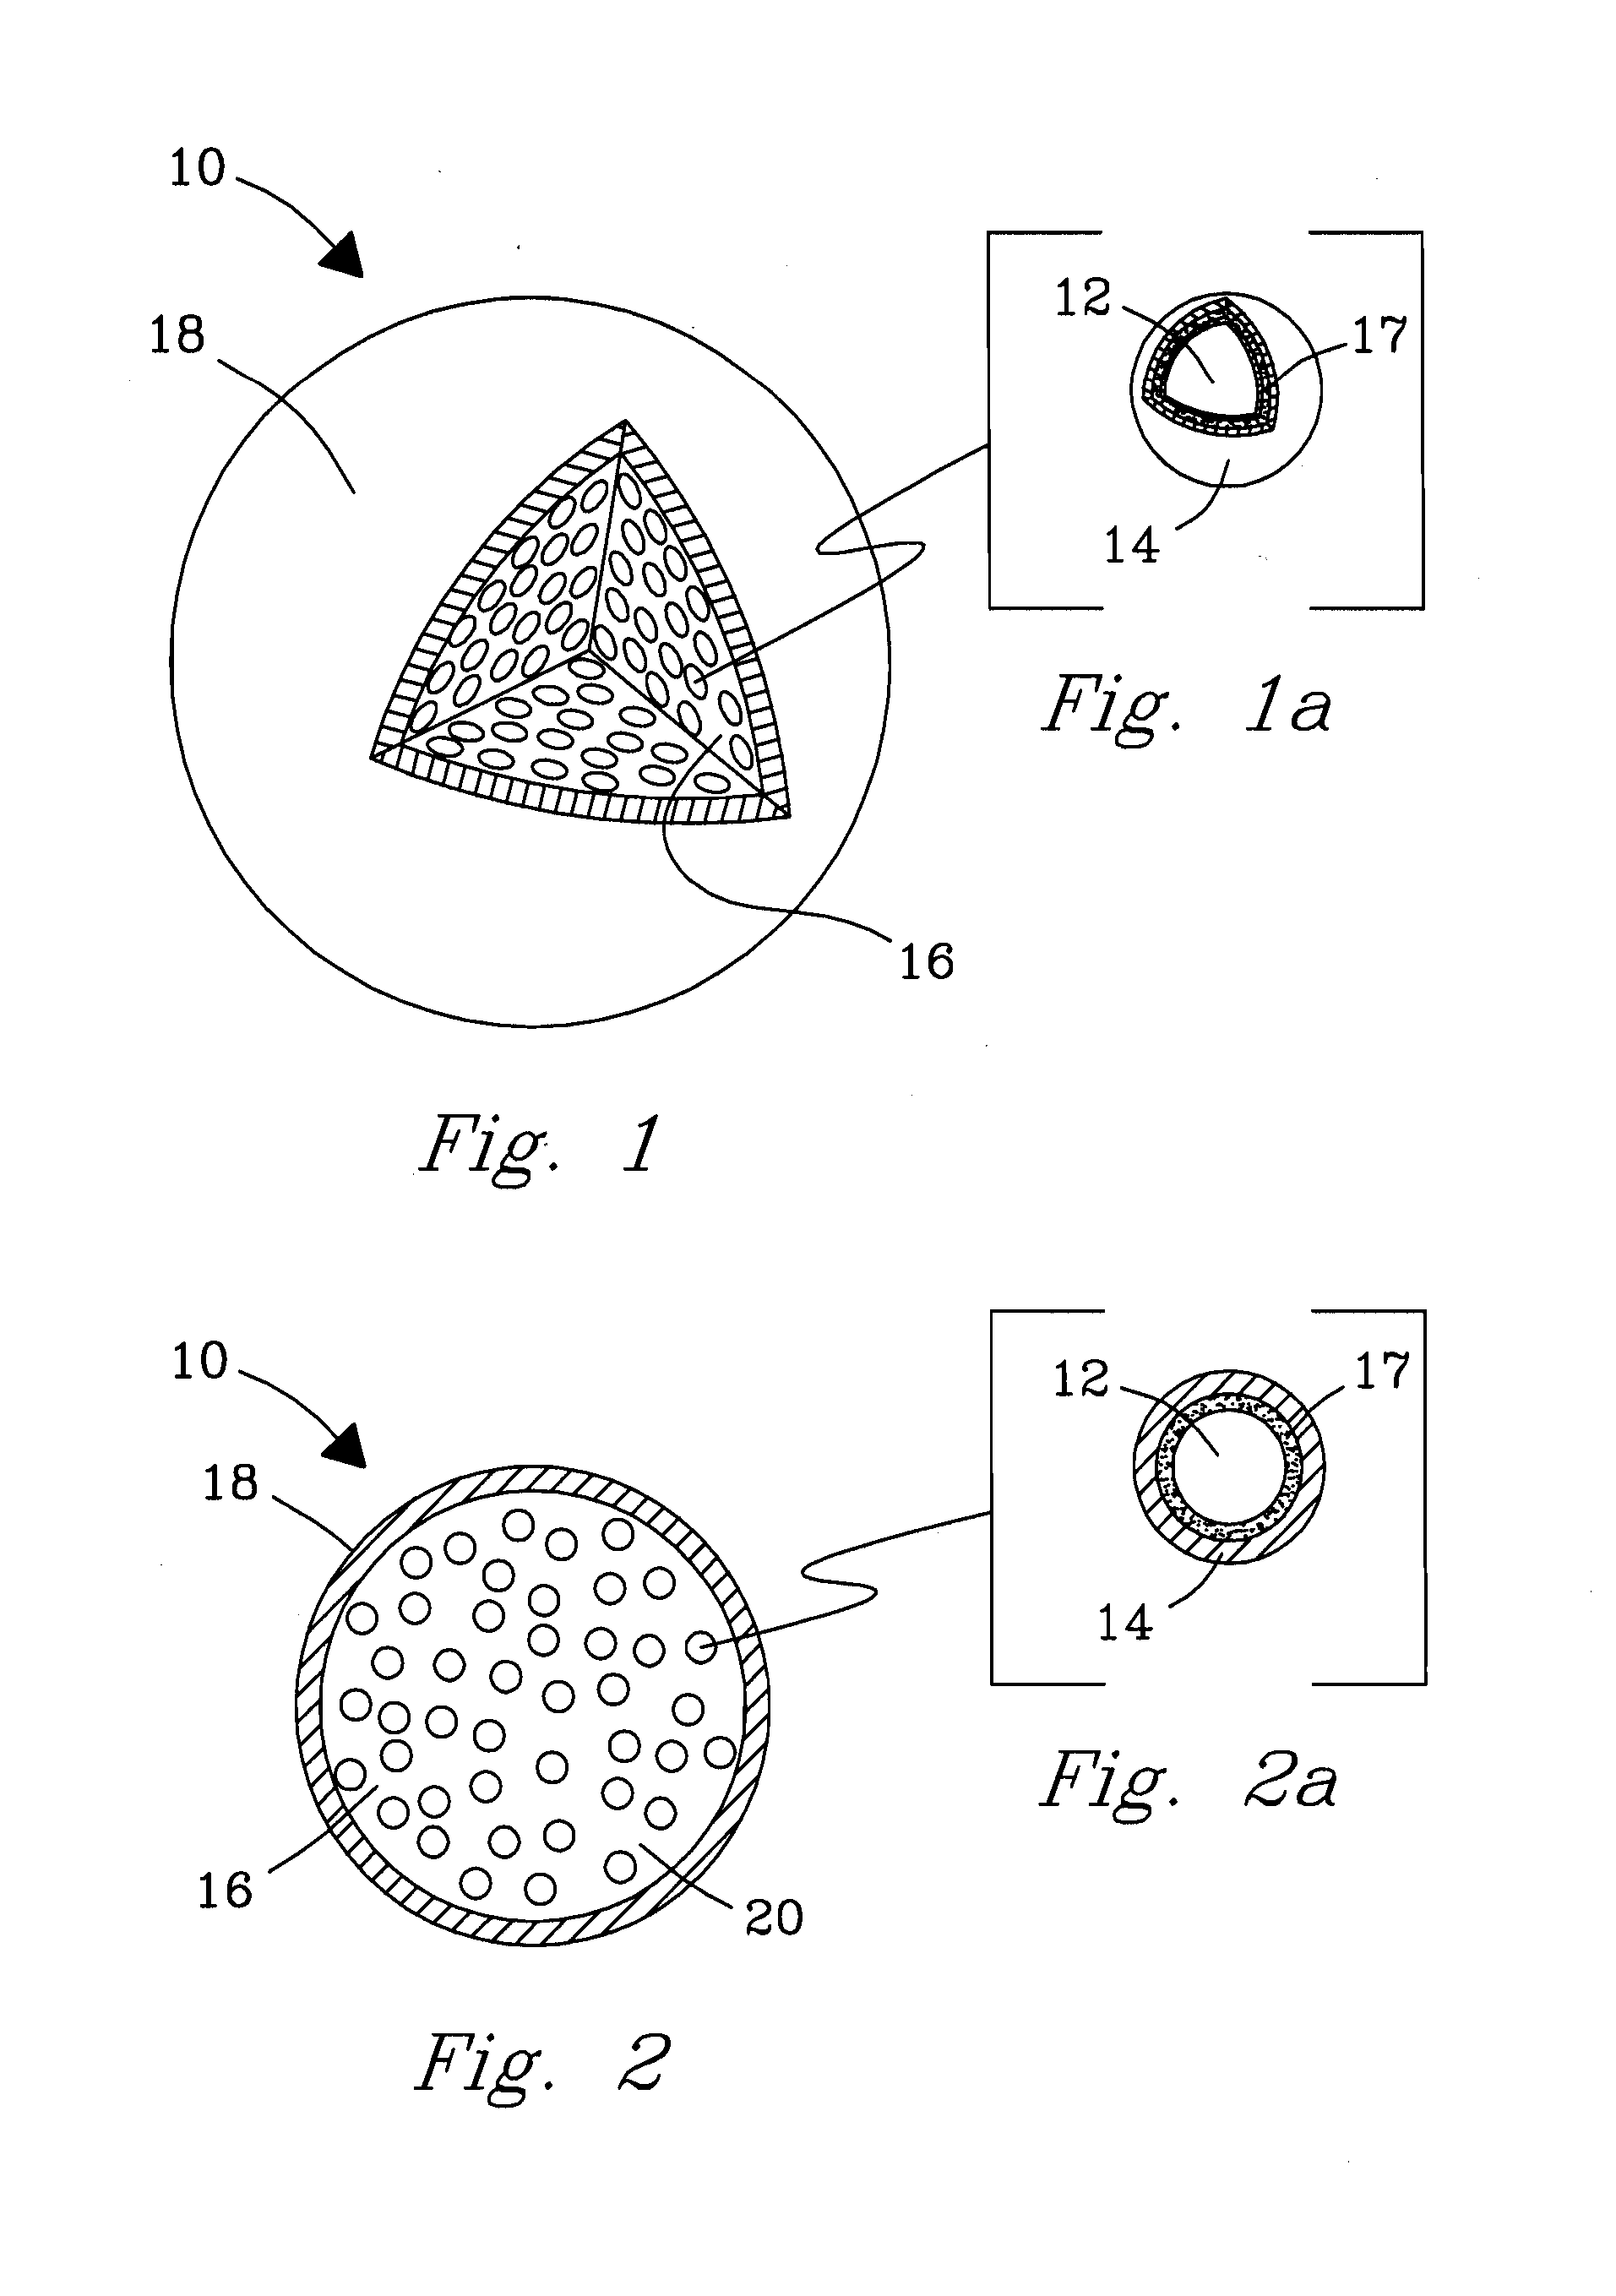 Fuel elements for nuclear reactor system